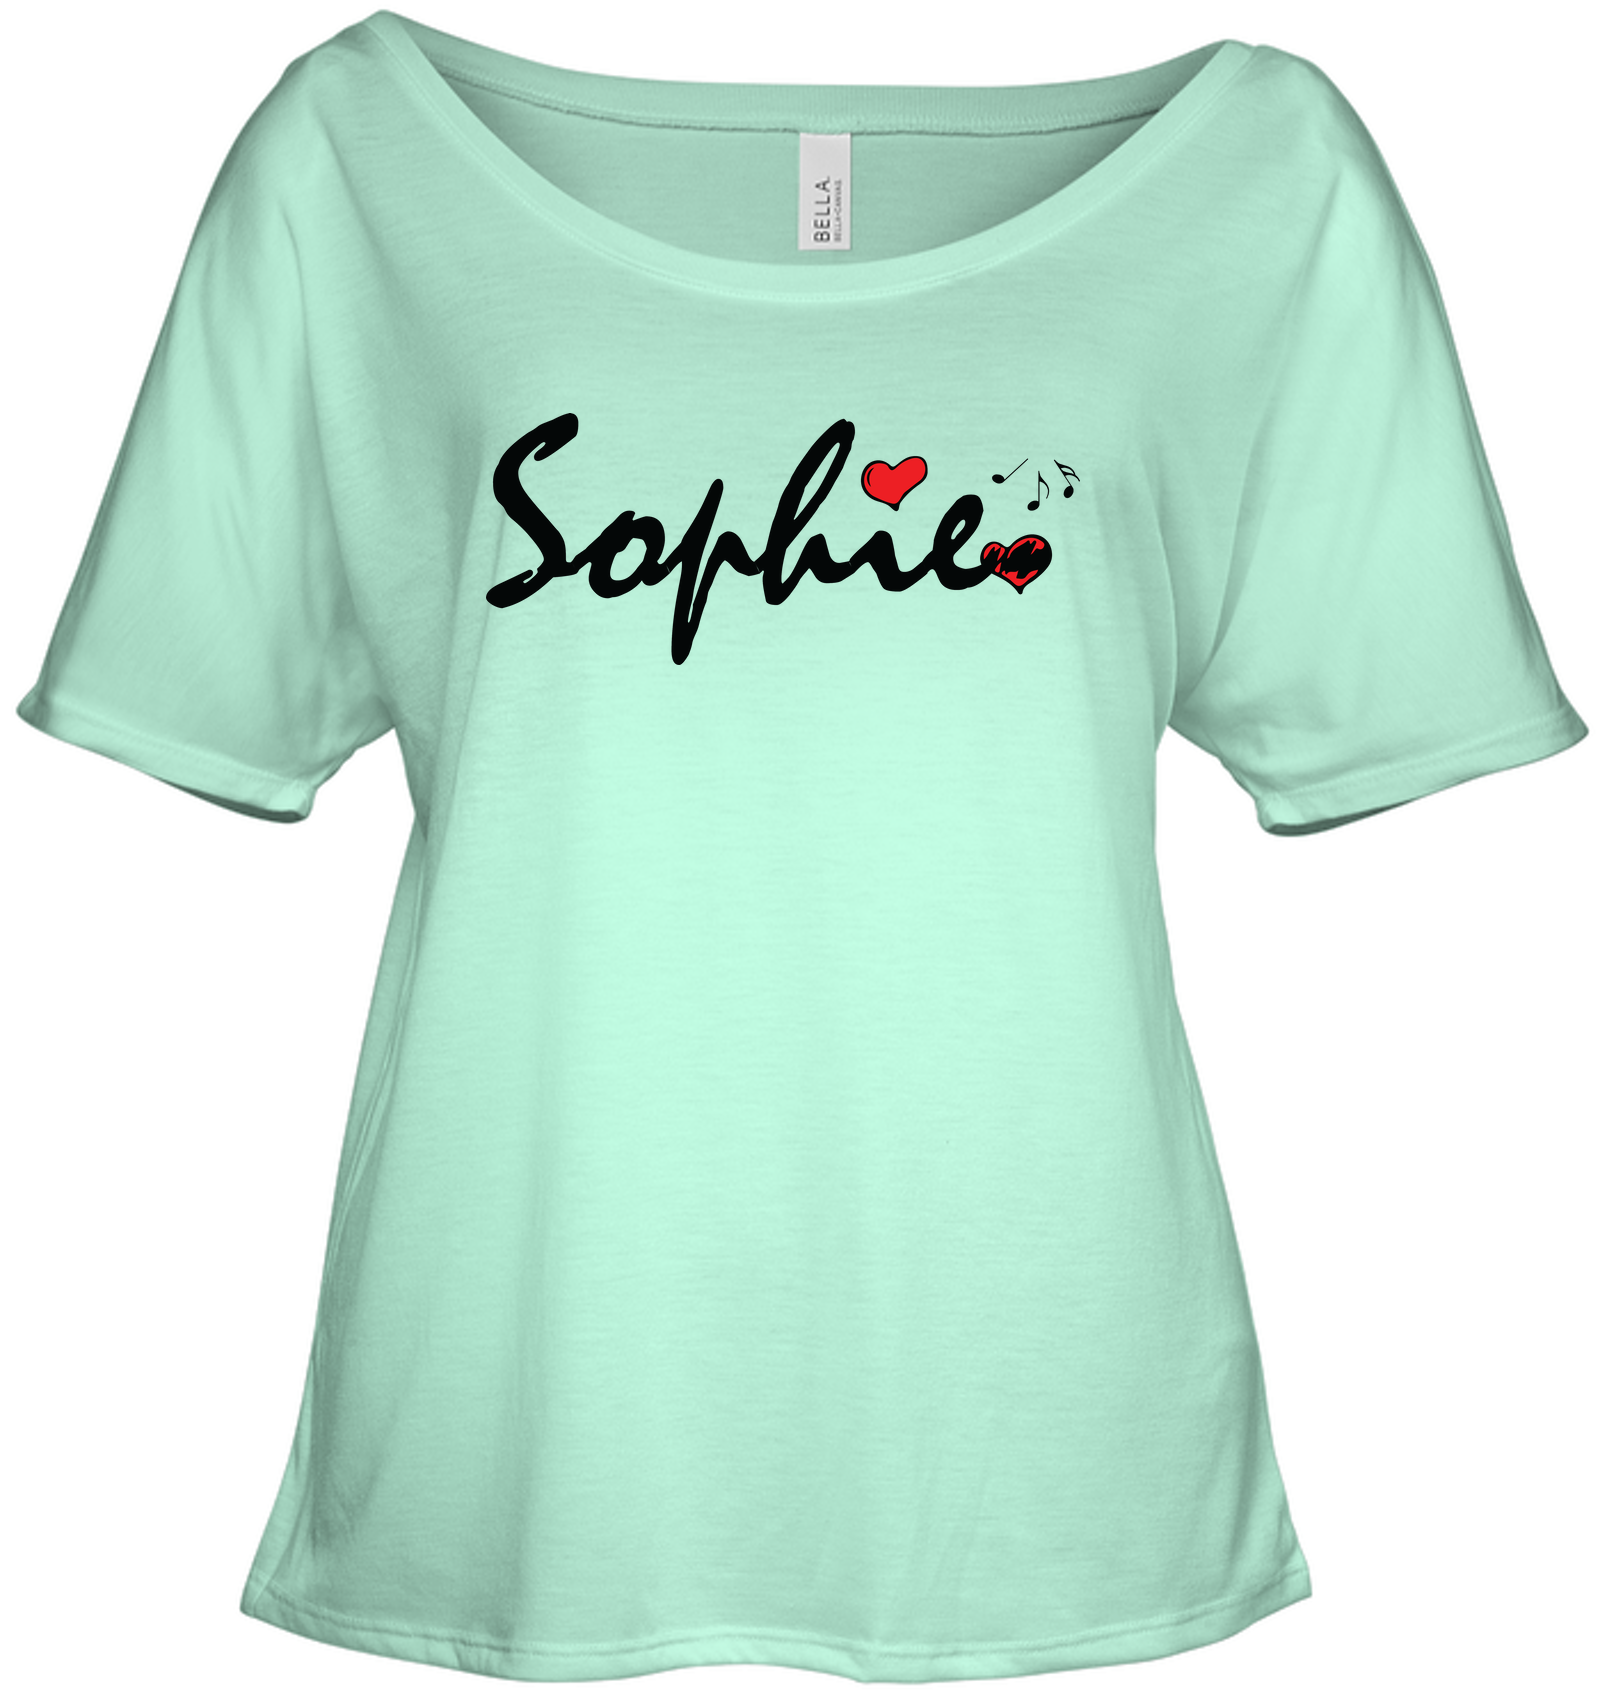 Sophie Loves Music - Bella + Canvas Women's Slouchy Tee